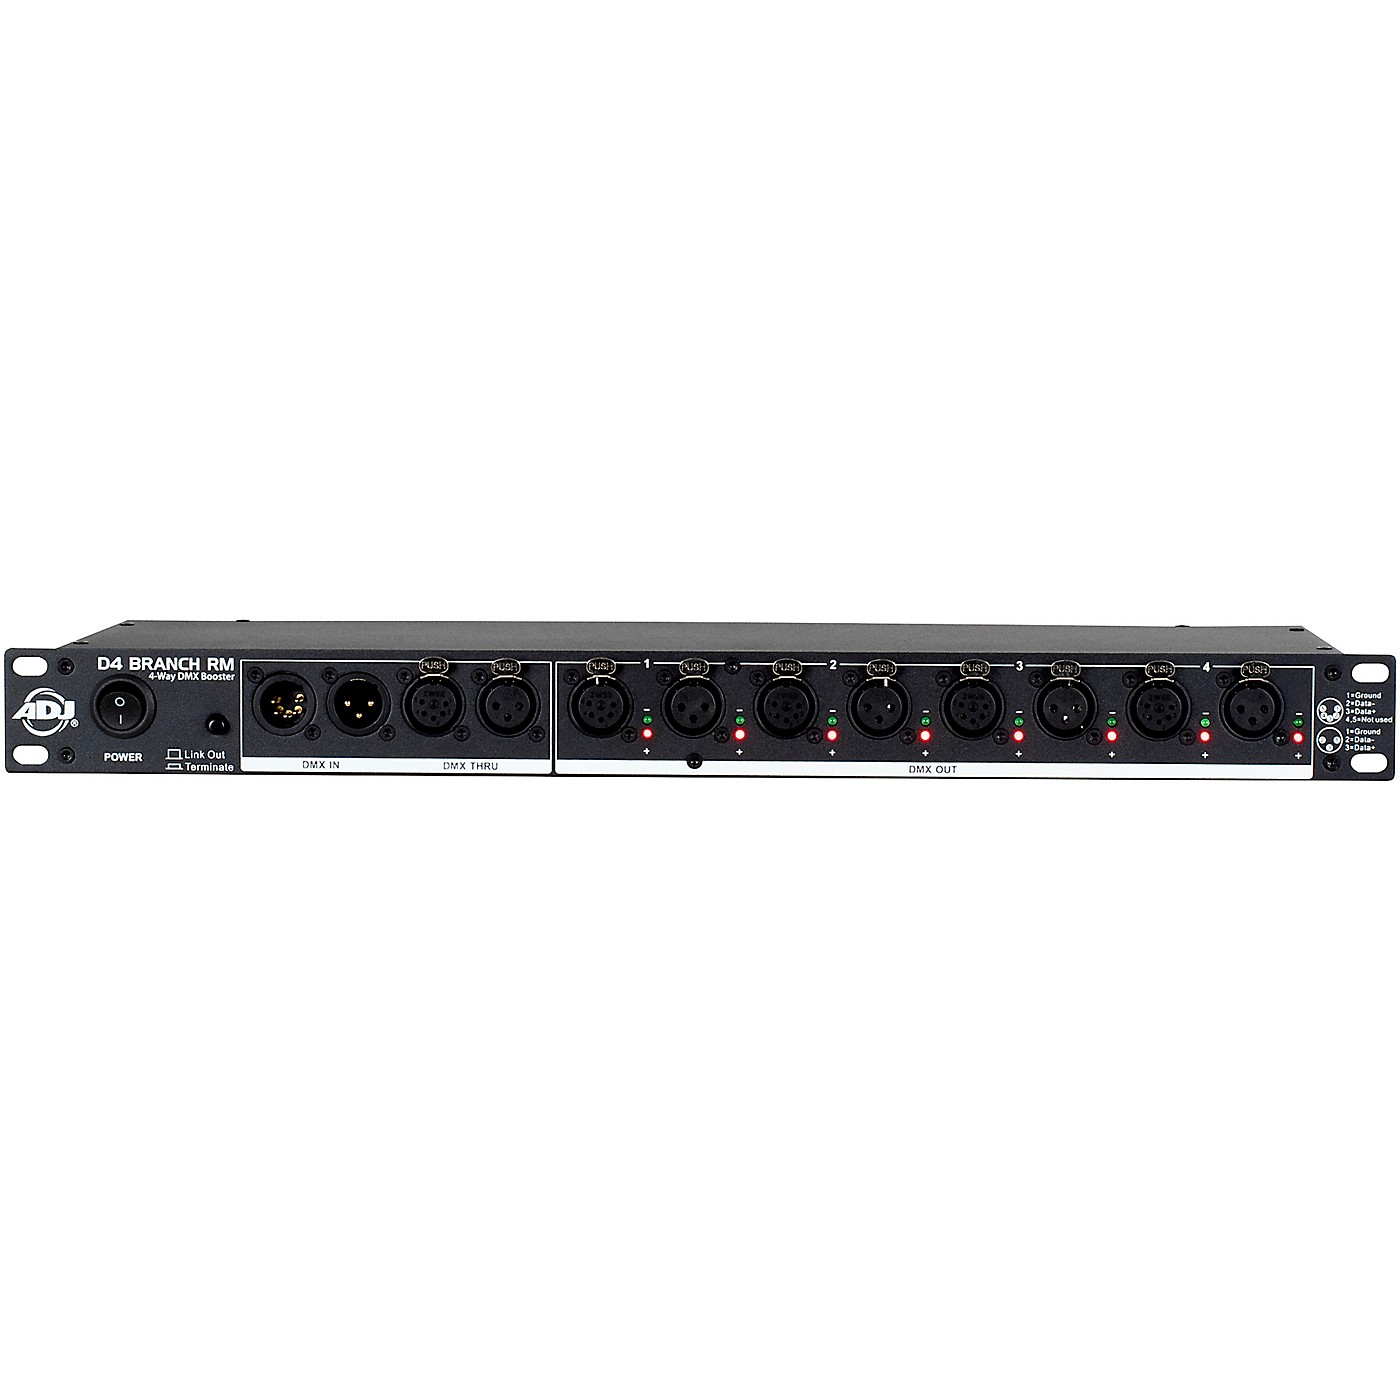 American DJ D4 Branch RM Single Rack Space, 4-way Distributor/Booster with 3-pin and 5-pin XLR Input and Output Jacks thumbnail